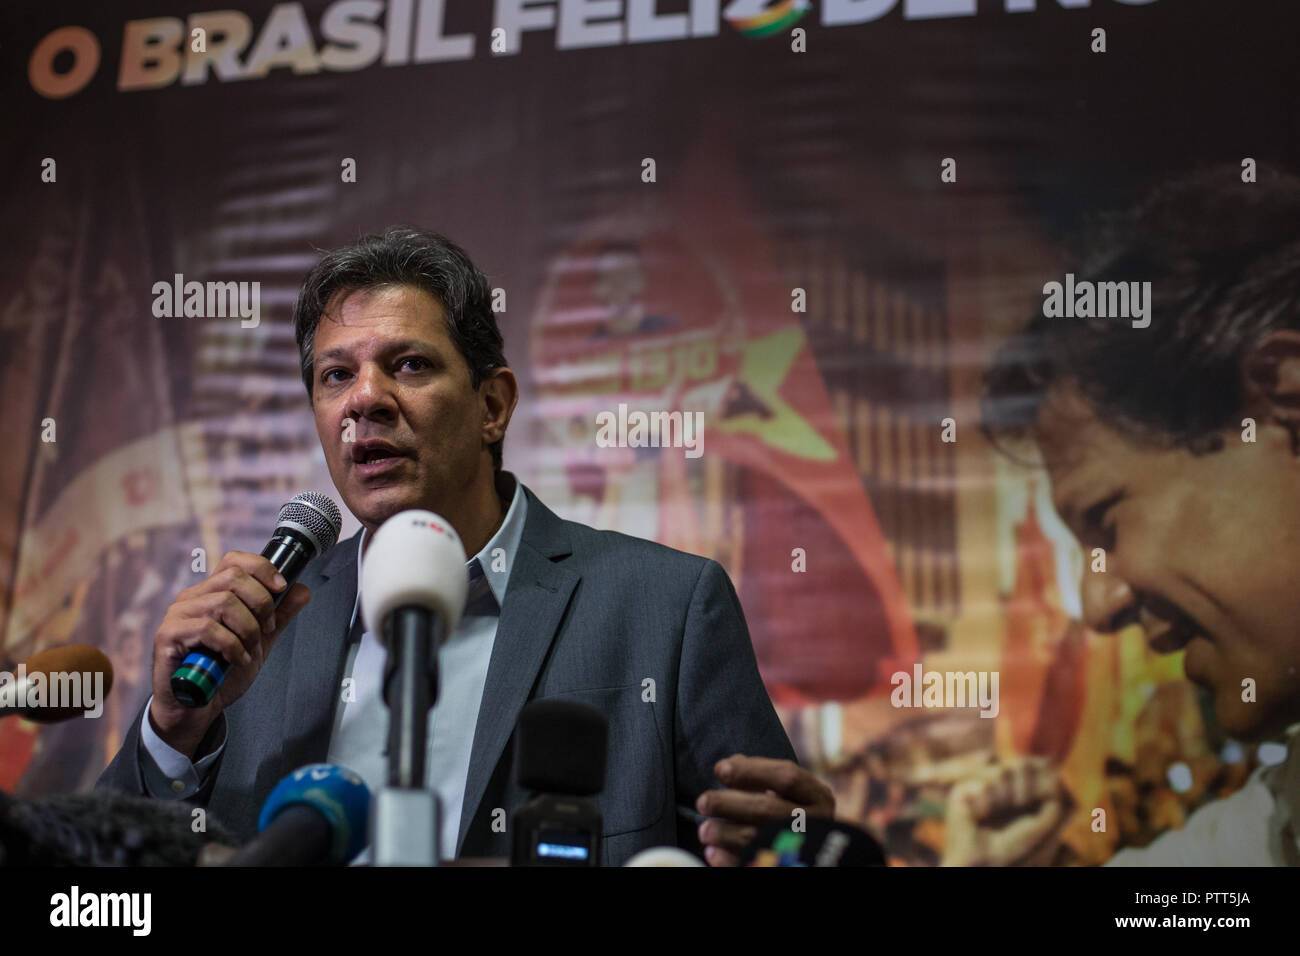 Sao Paulo, Brazil. 10th Oct, 2018. 10 October 2018, Brazil, Sao Paulo: Fernando Haddad, candidate of the Labour Party for the office of Brazilian presidency, speaks at a press conference in Sao Paulo. Haddad called on his political opponent, the ultra-right Bolsonaro, to take part in a debate before the run-off. Credit: Warley Kenji/dpa/Alamy Live News Stock Photo